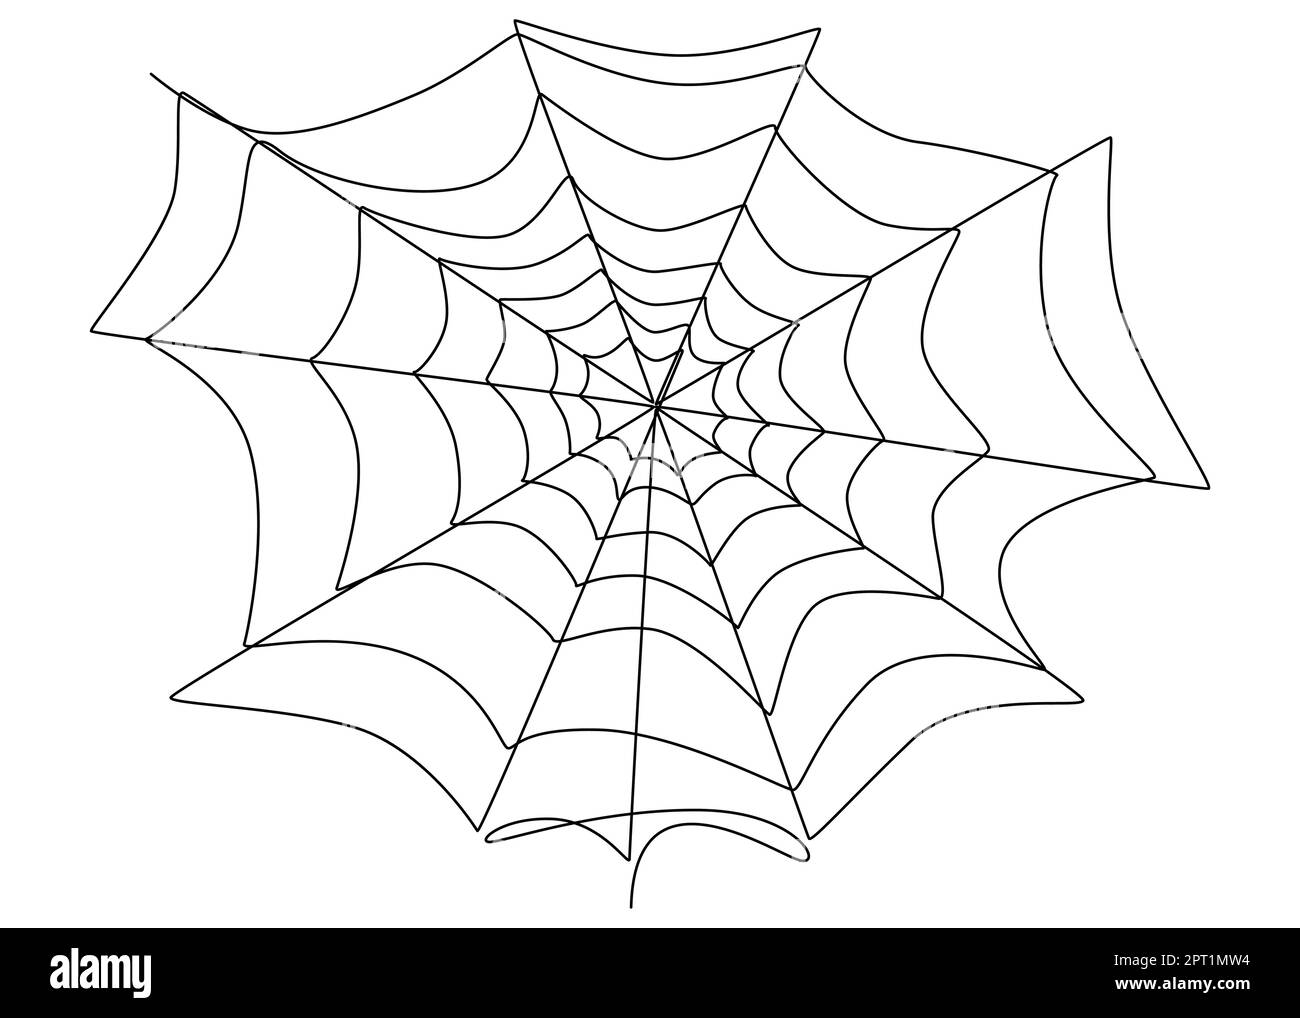 One continuous line of Spider web. Stock Vector